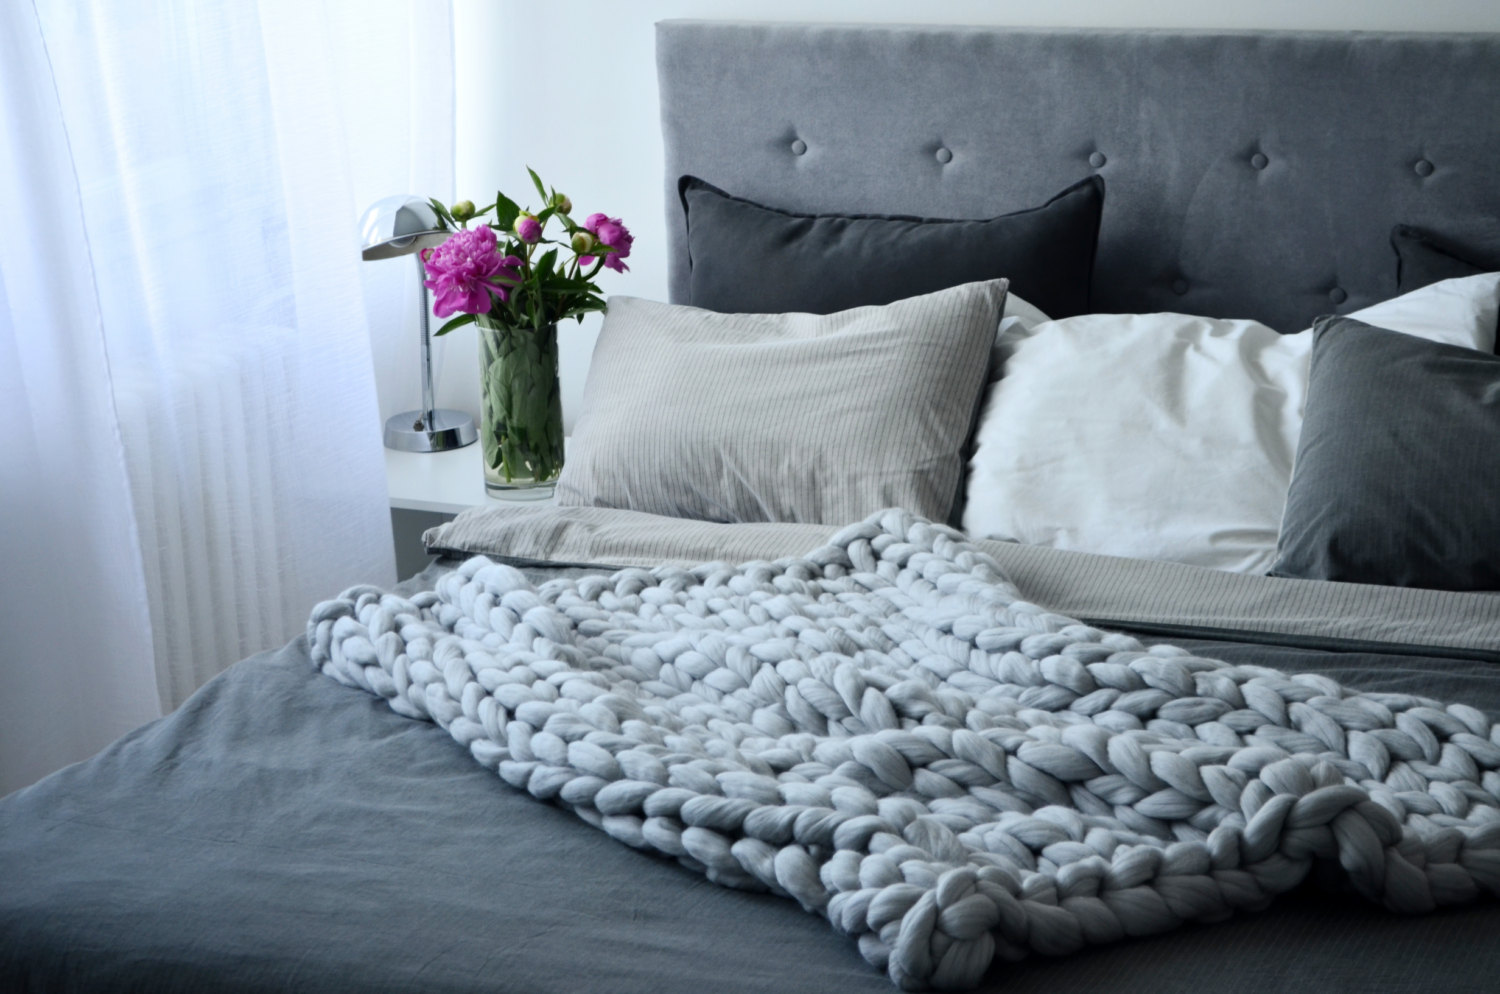 Luxury-Handmade-Crocheted-Bed-Knitted-Sofa-Cover-Blankets-5-Colors-Thick-Thread-Blanket-1402074-7